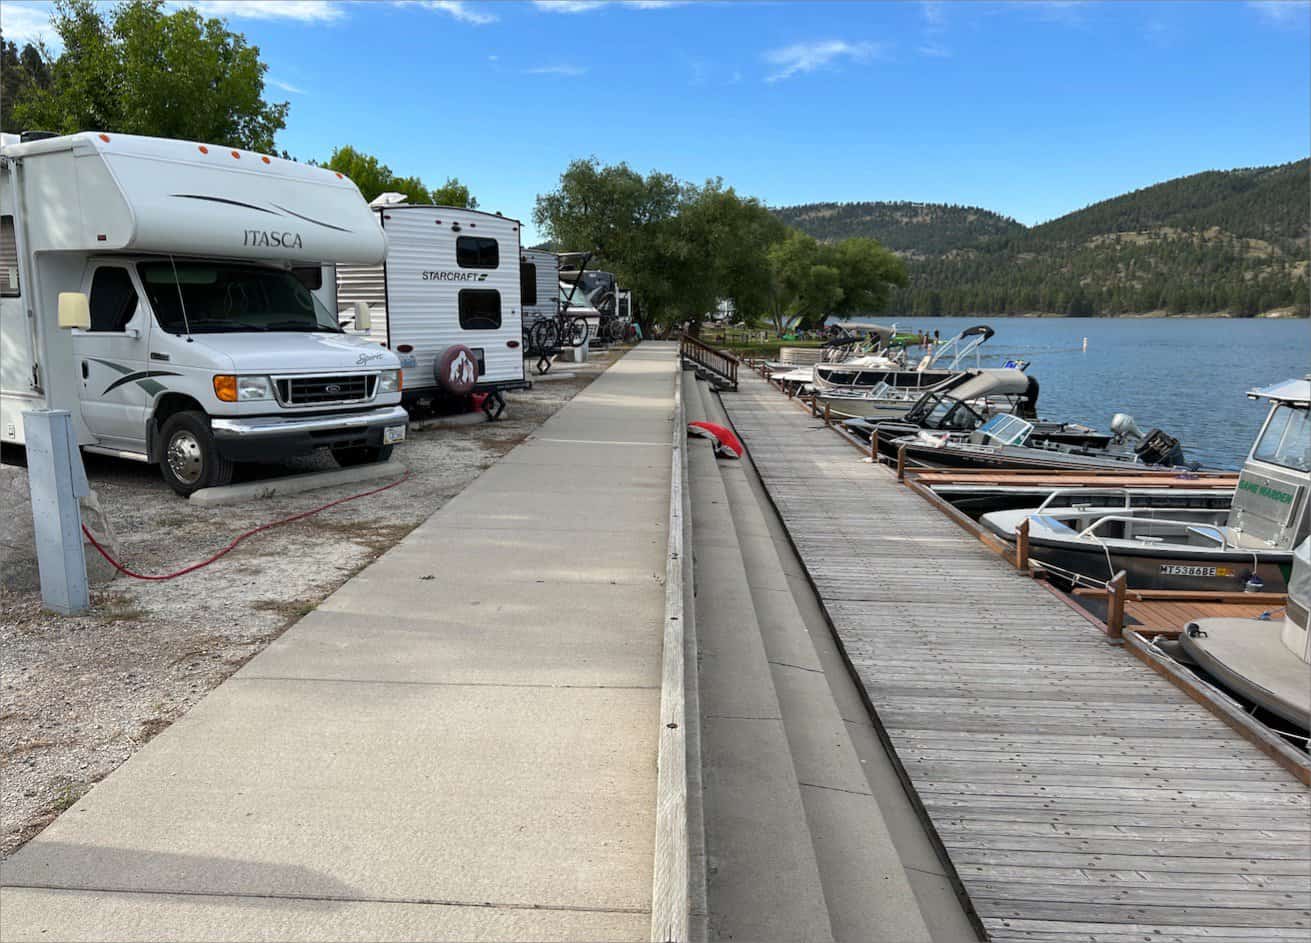 Rvs parked beside a lake with a dock and moored boats at Black Sandy State Park.